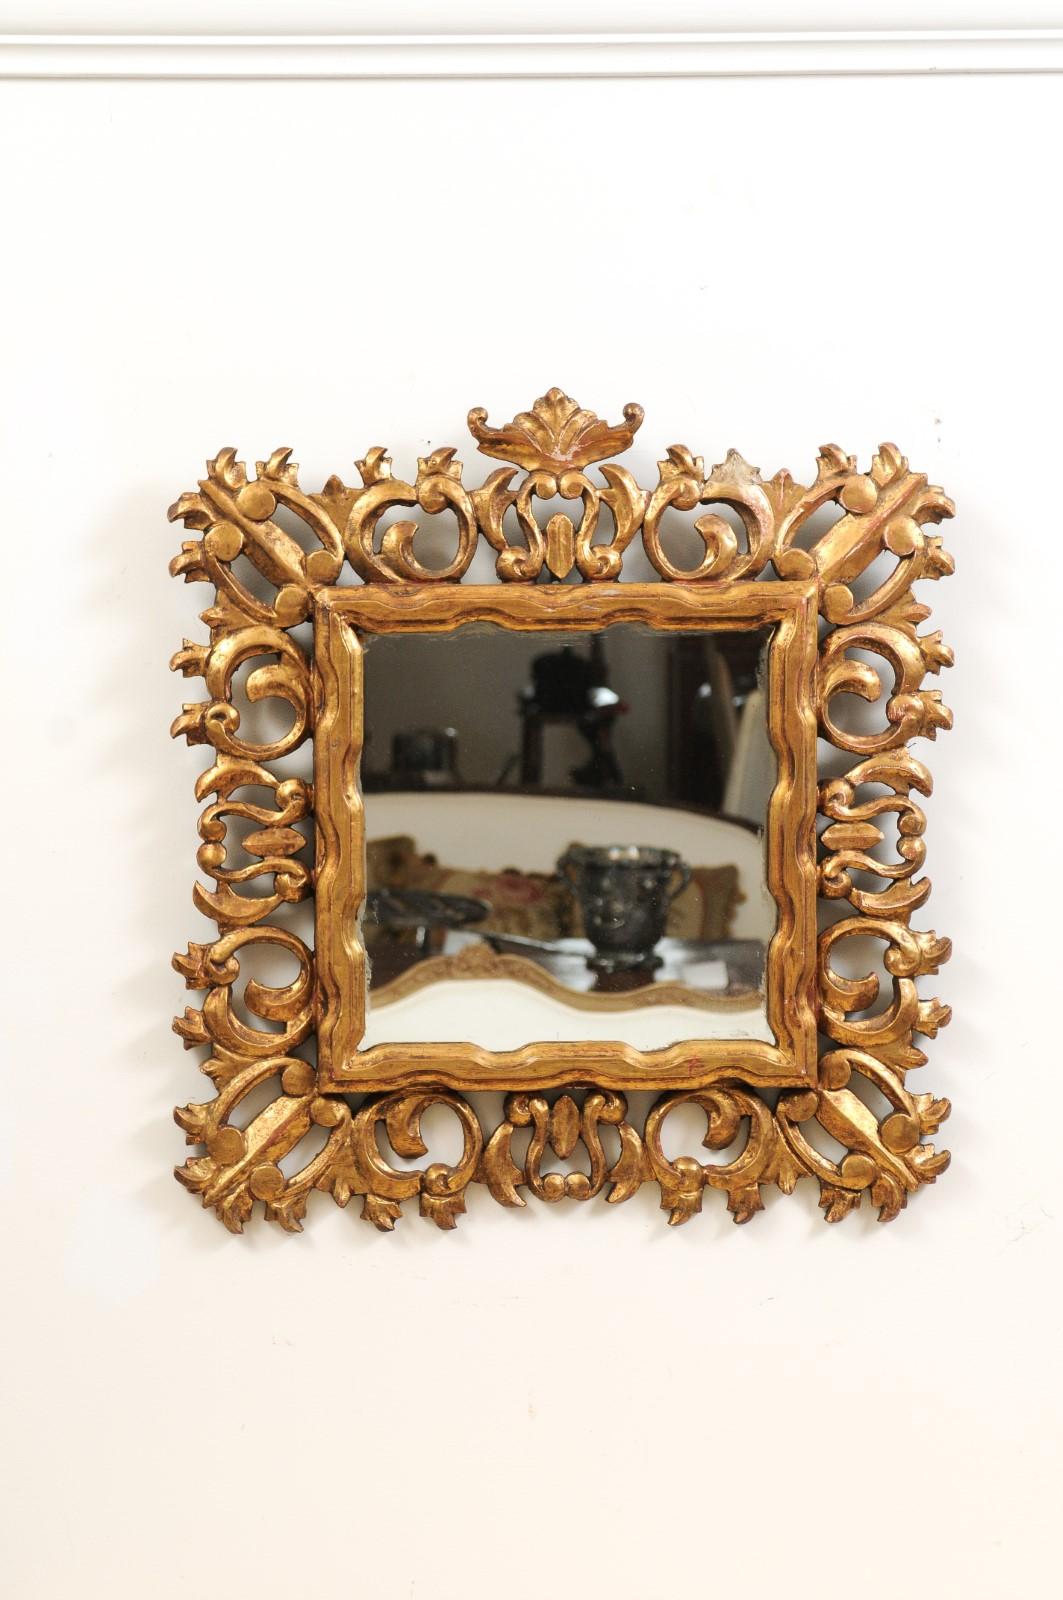 Italian Florentine 20th Century Carved Giltwood Mirror with C-Scrolls and Foliage Motifs